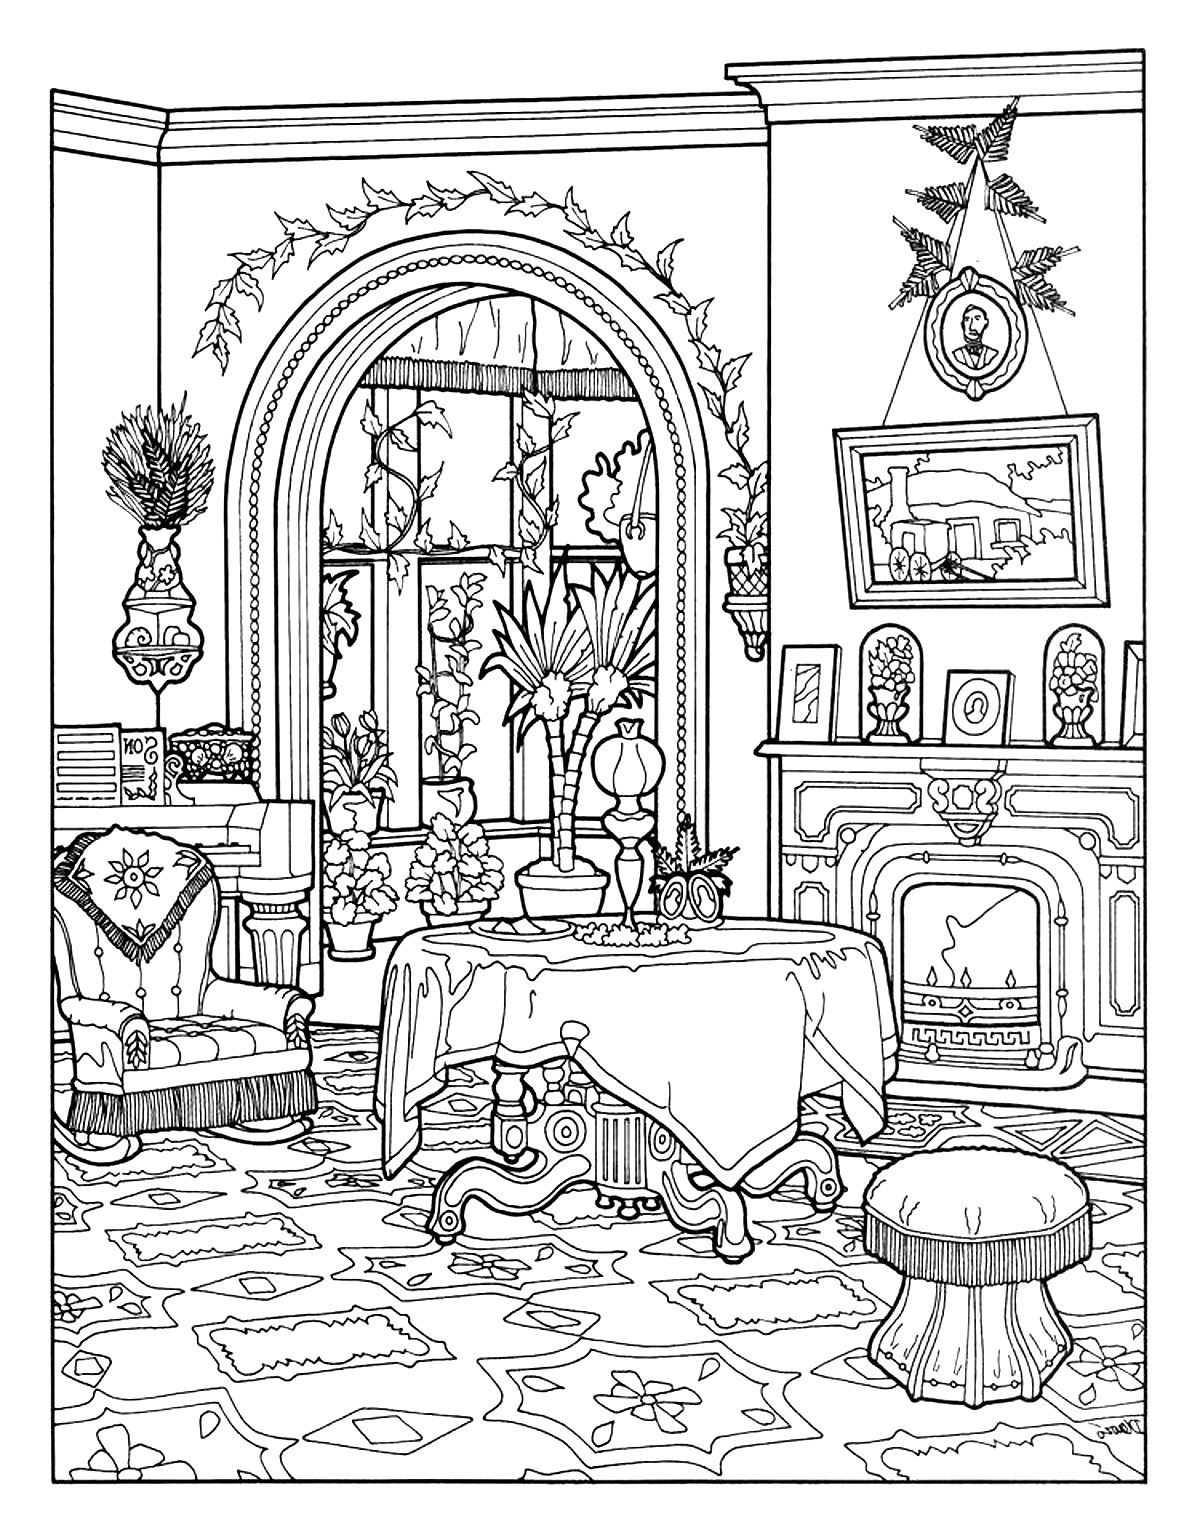 100 Free Coloring Pages for Adults and Children | House ...